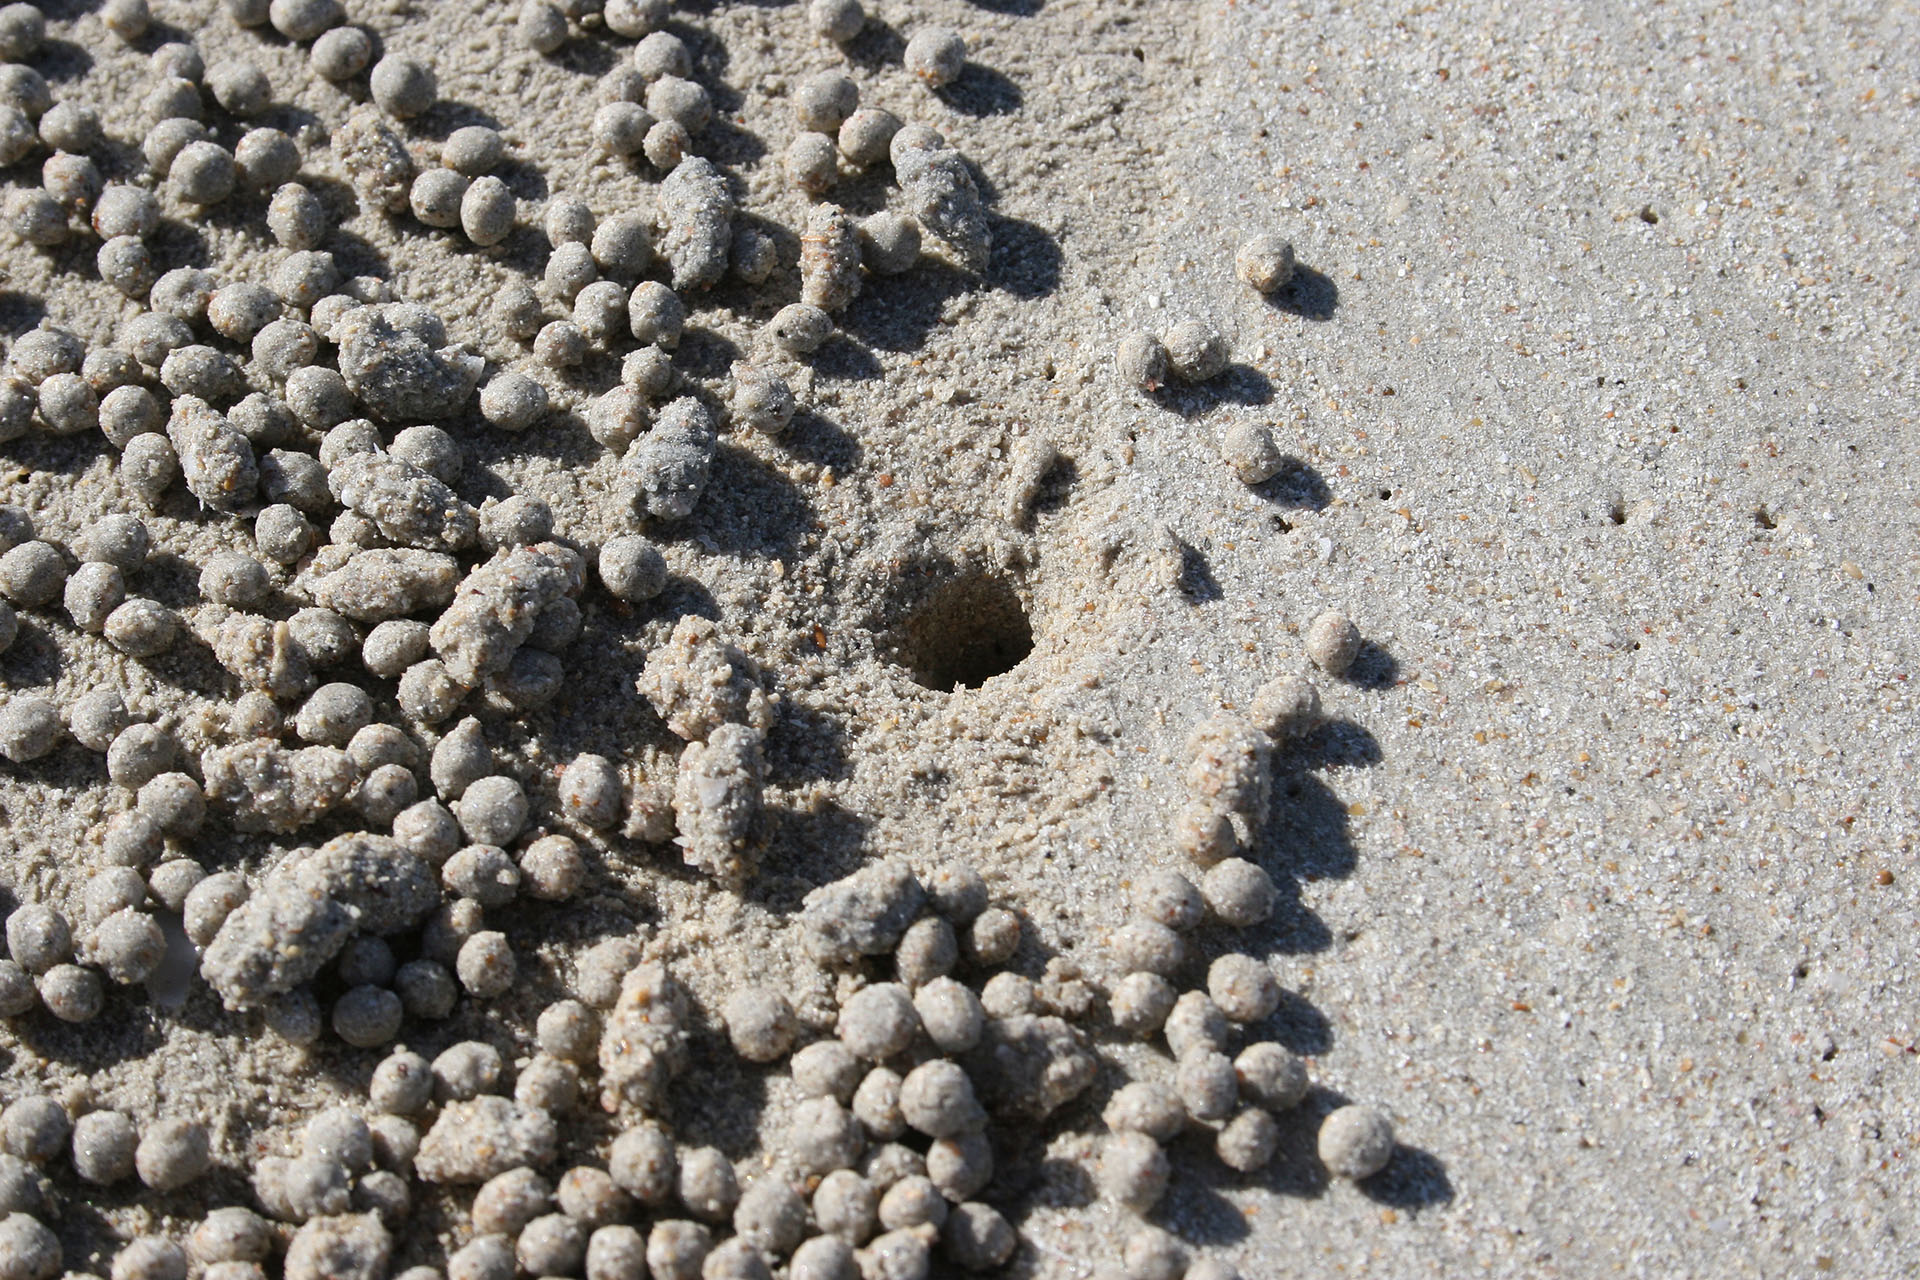 Home of a sand bubbler crab. These sand pellets are what's left from its lunch.